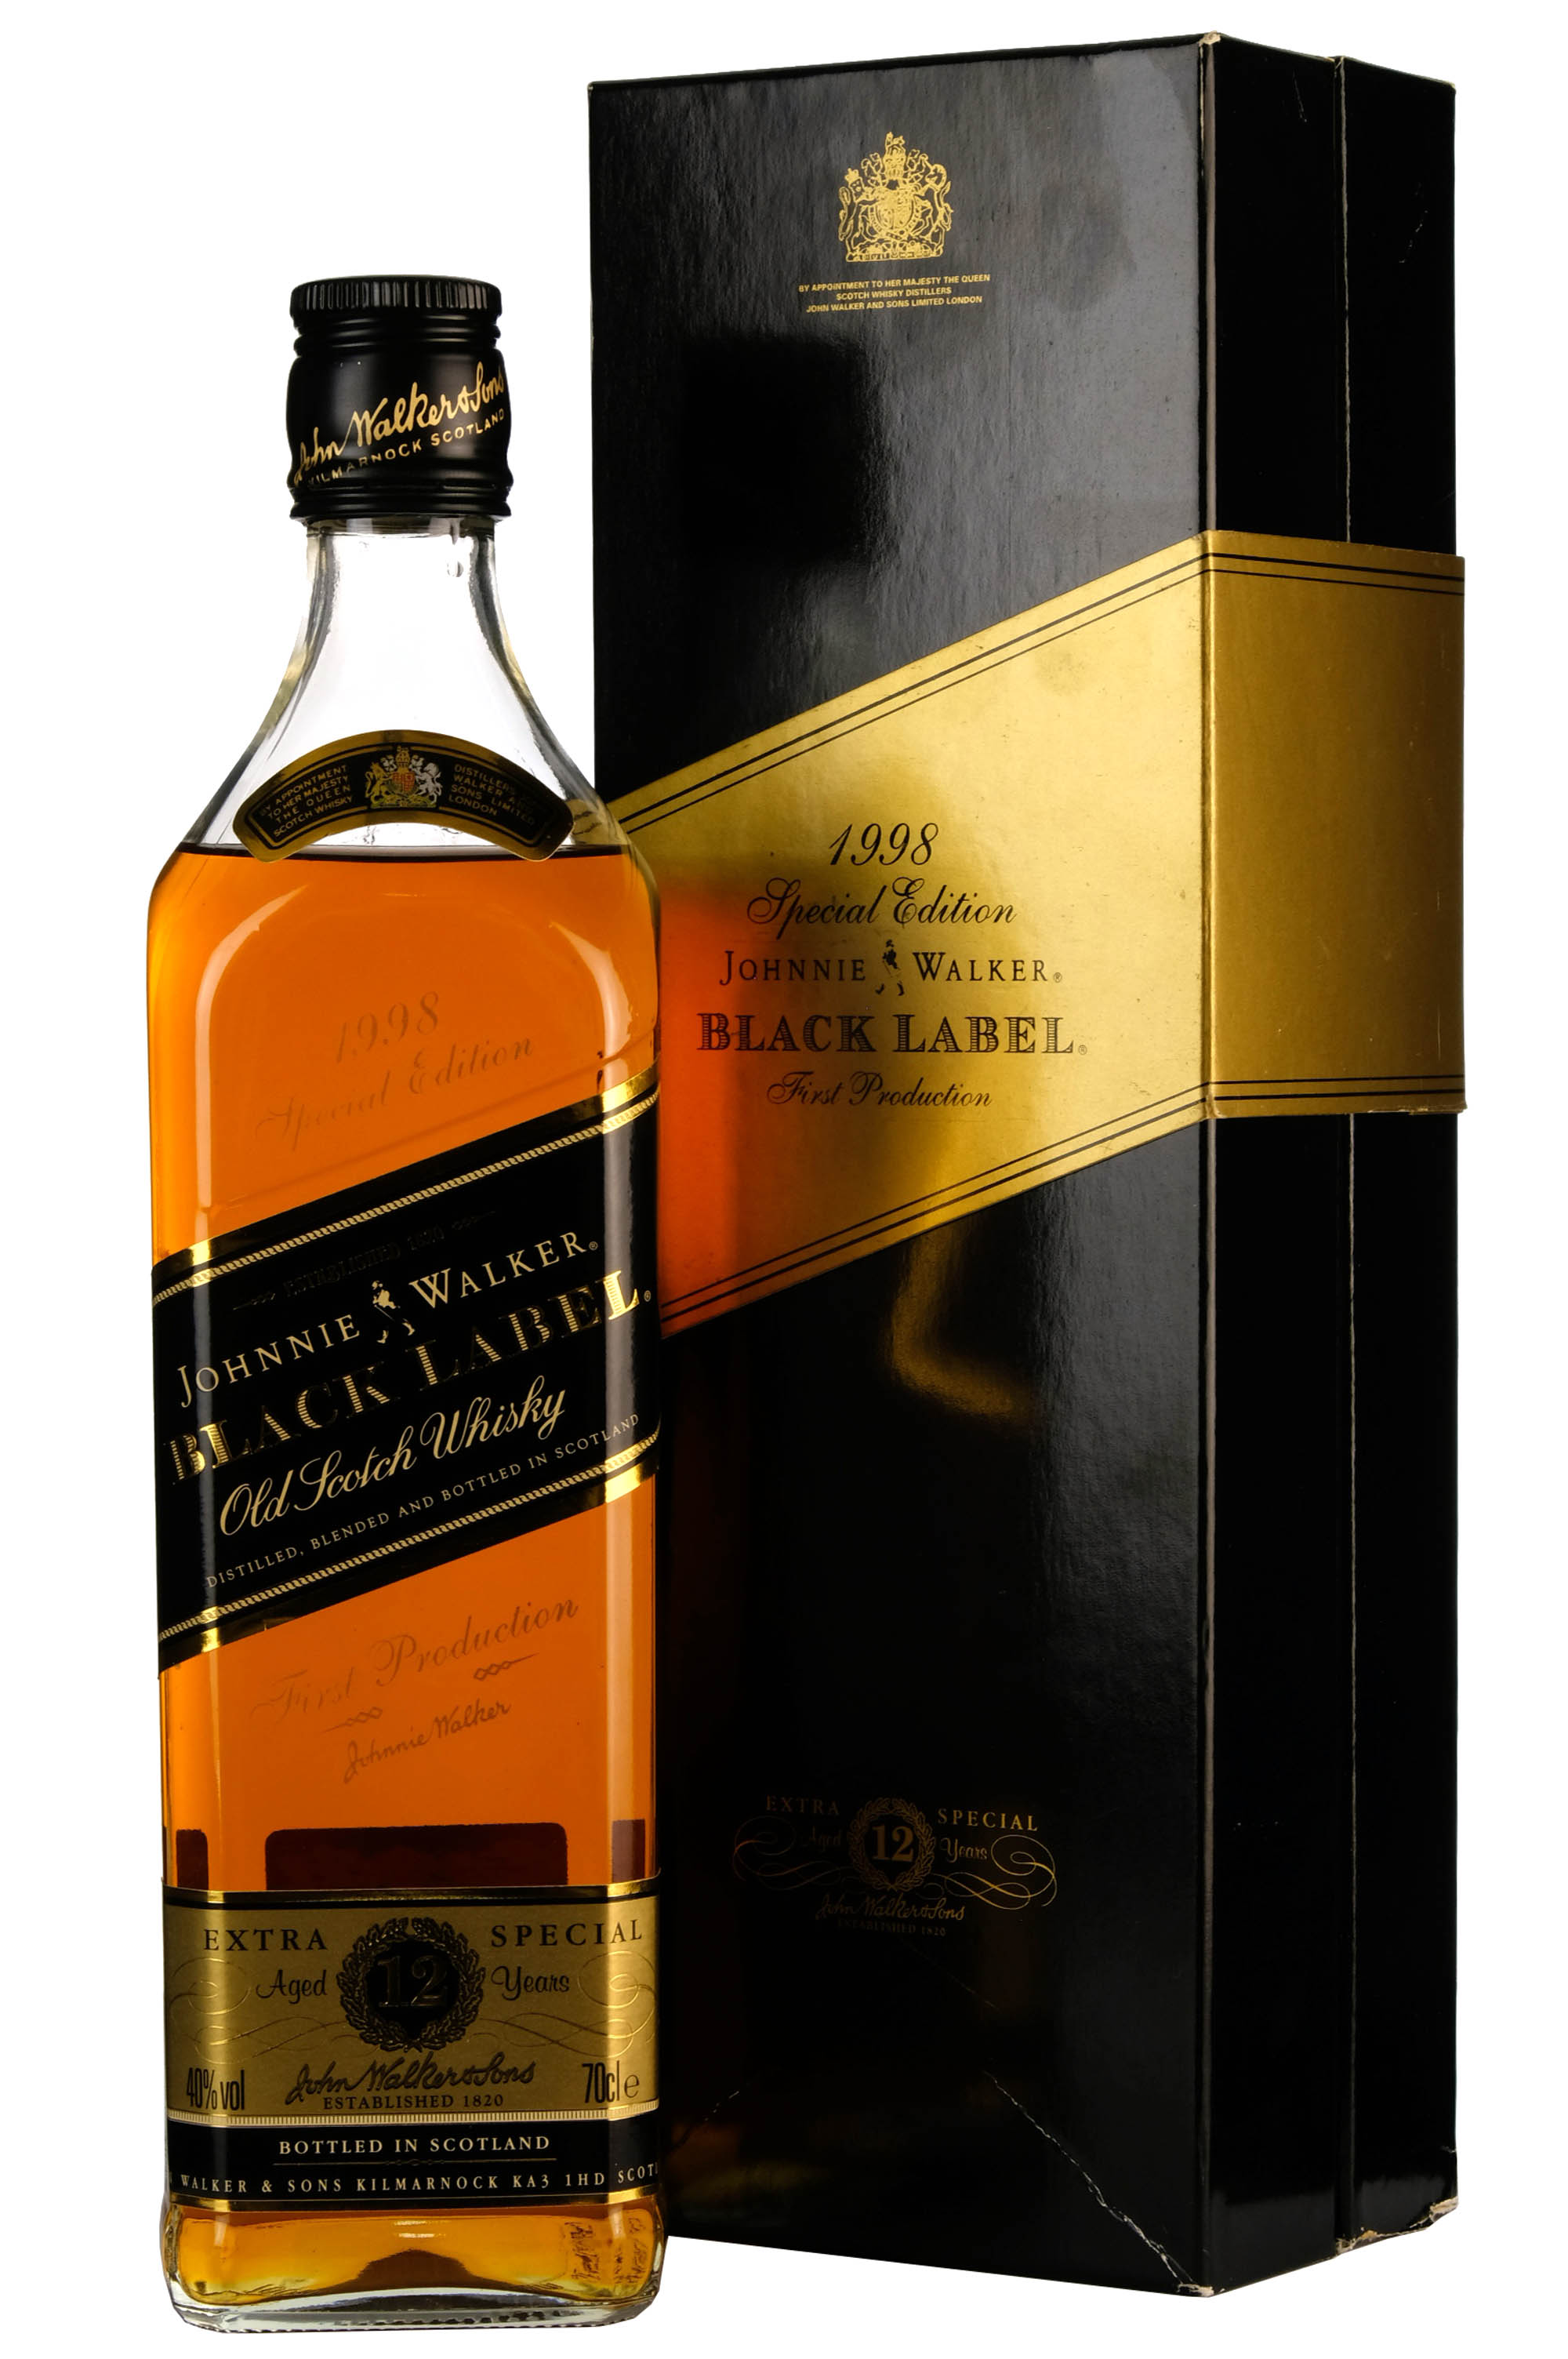 Johnnie Walker Black Label | 12 Year Old | 1998 Special Edition First Production